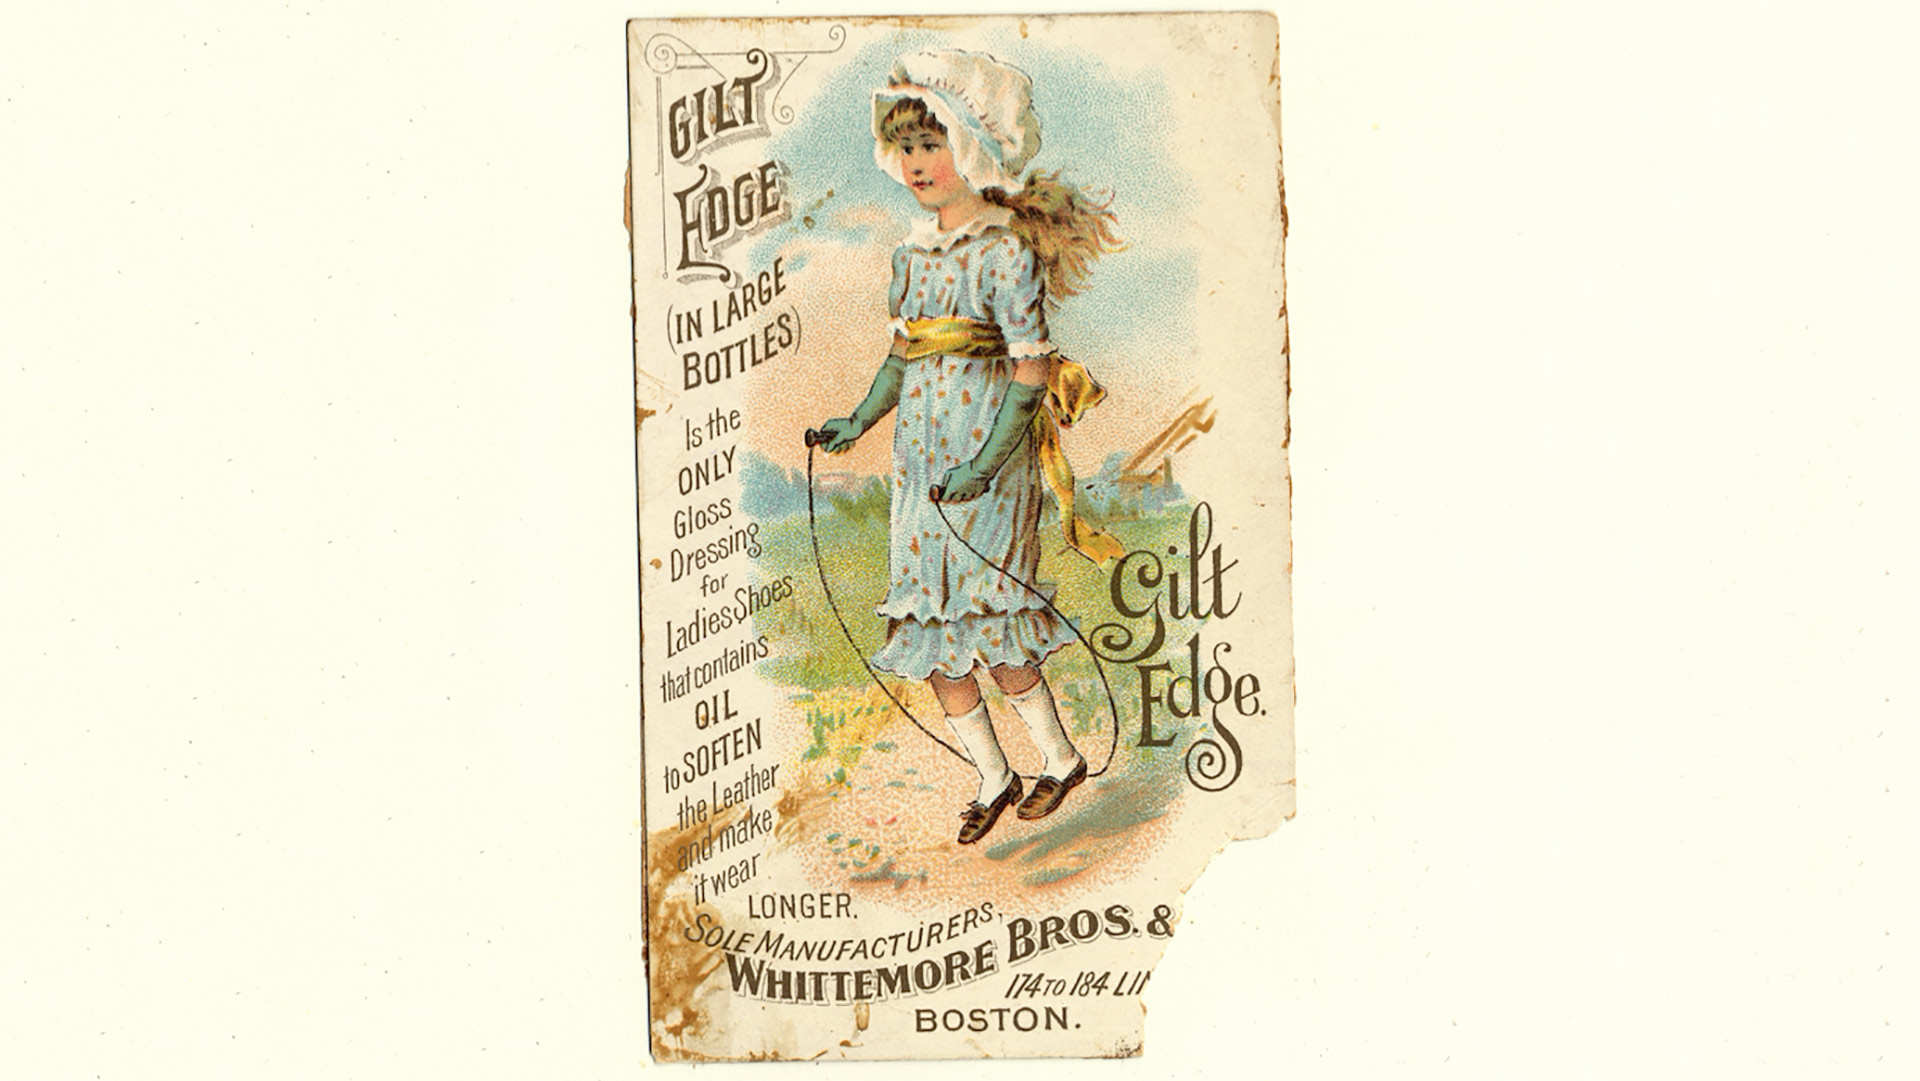 paper advertisement for ladies shoes with a little girl in blue dress from historic times